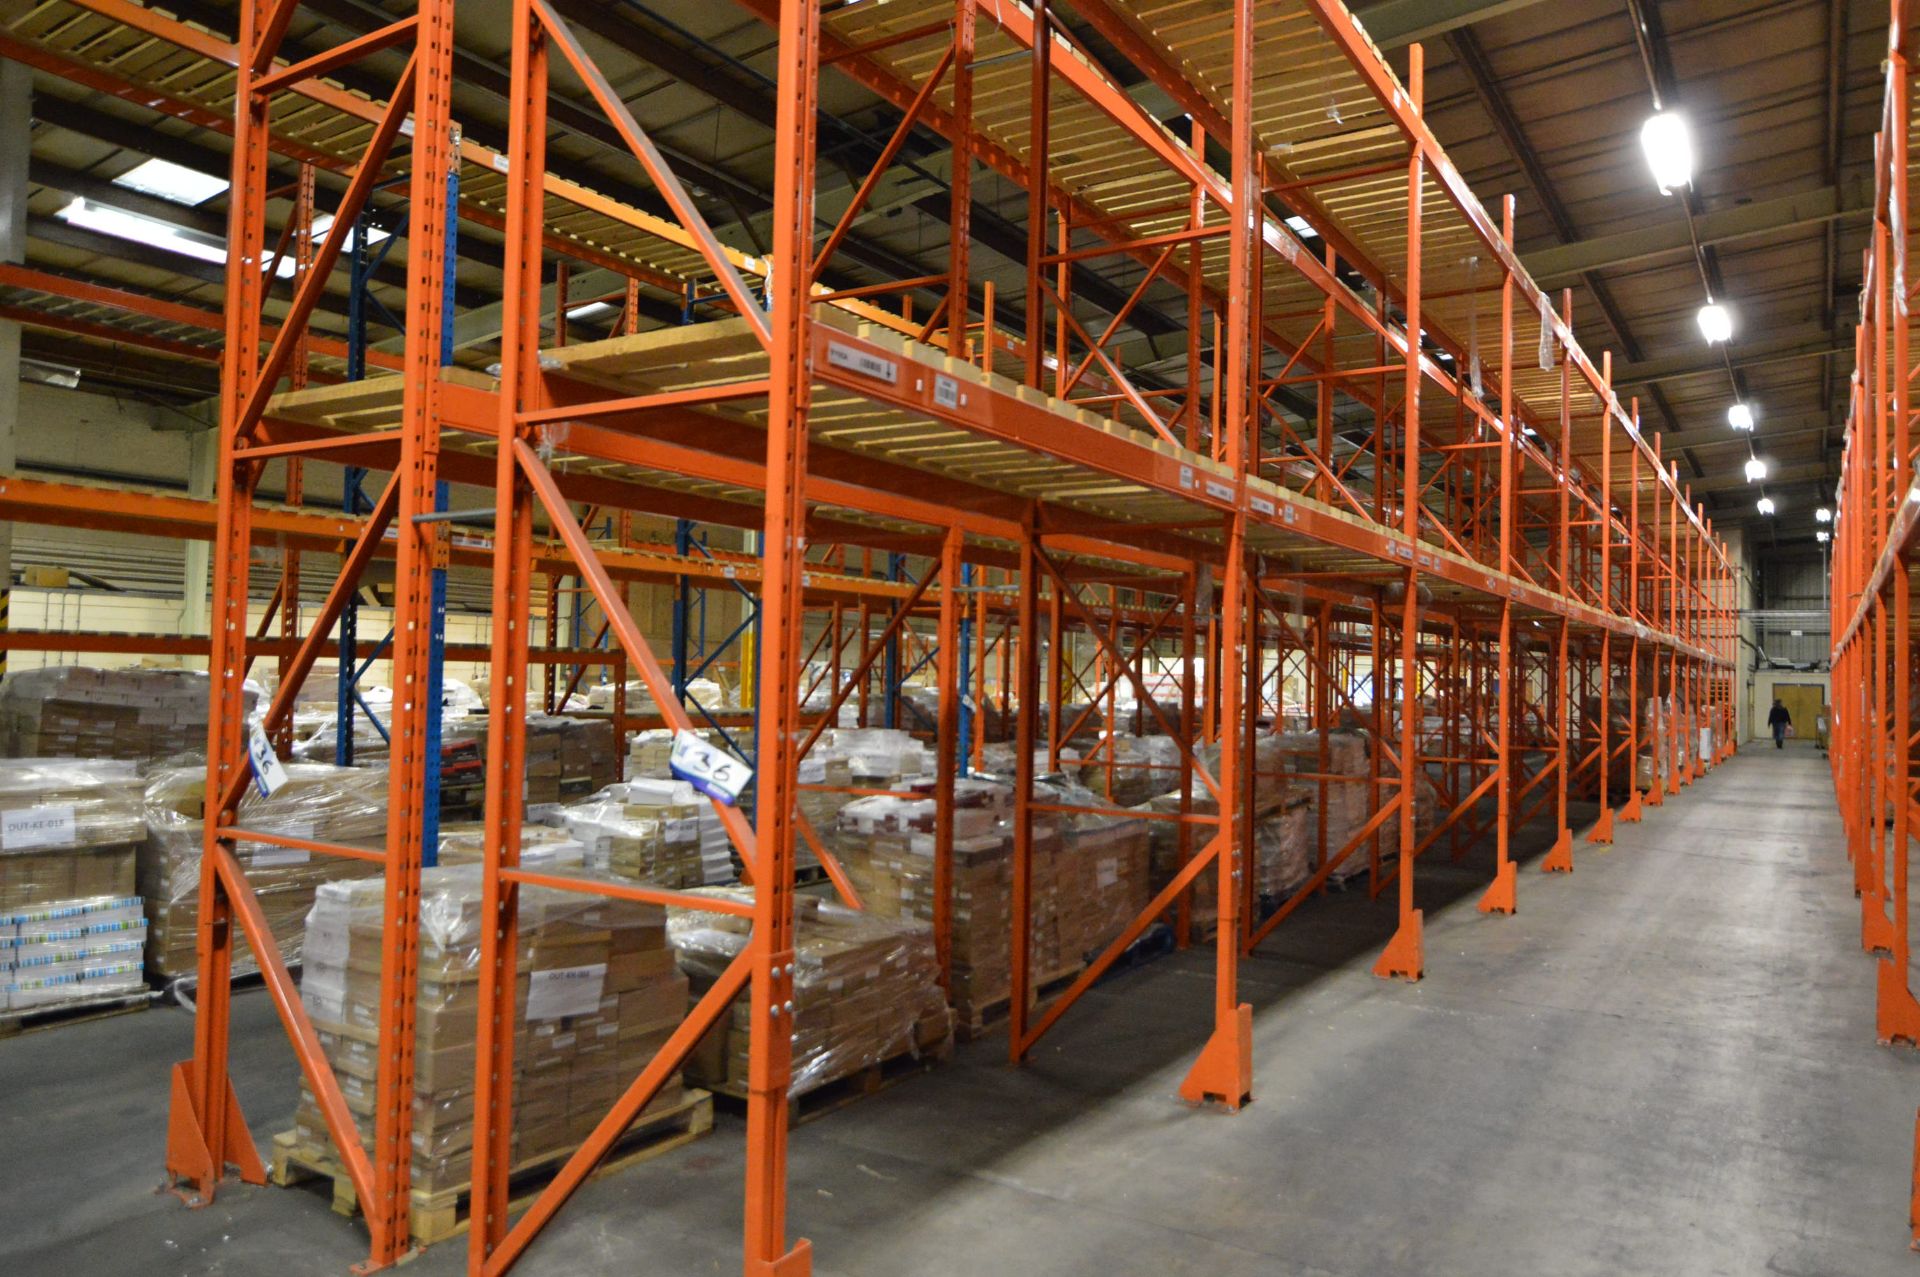 Redirack SD 2.50 DOUBLE SIDED 30 BAY MAINLY TWO TIER PALLET RACK, each run approx. 41m x 1m x 5.4m